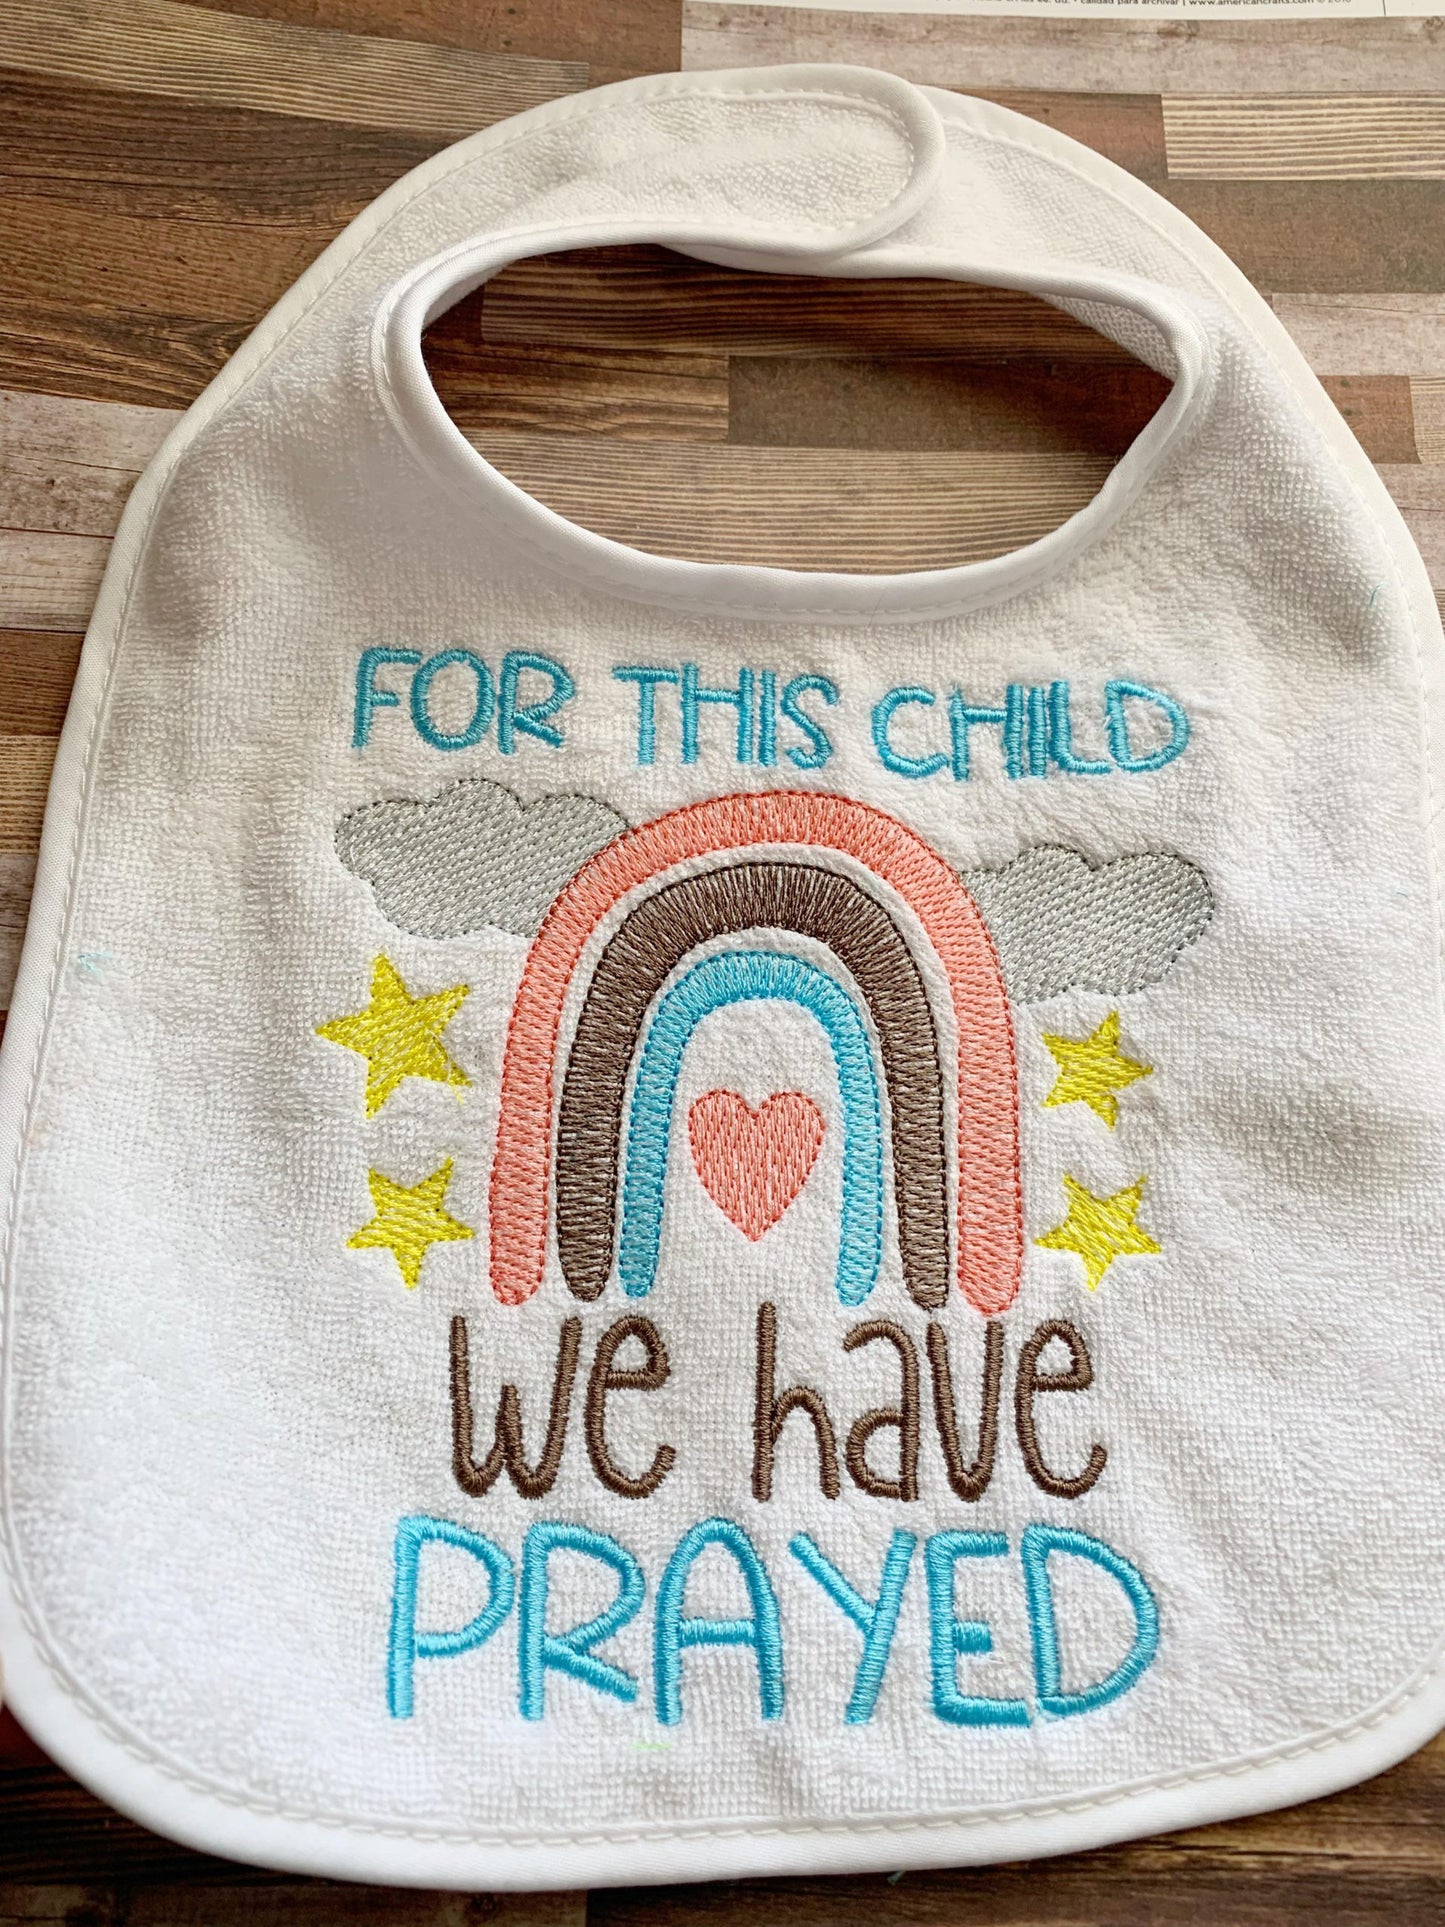 For this child we have prayed - 4 sizes- Digital Embroidery Design